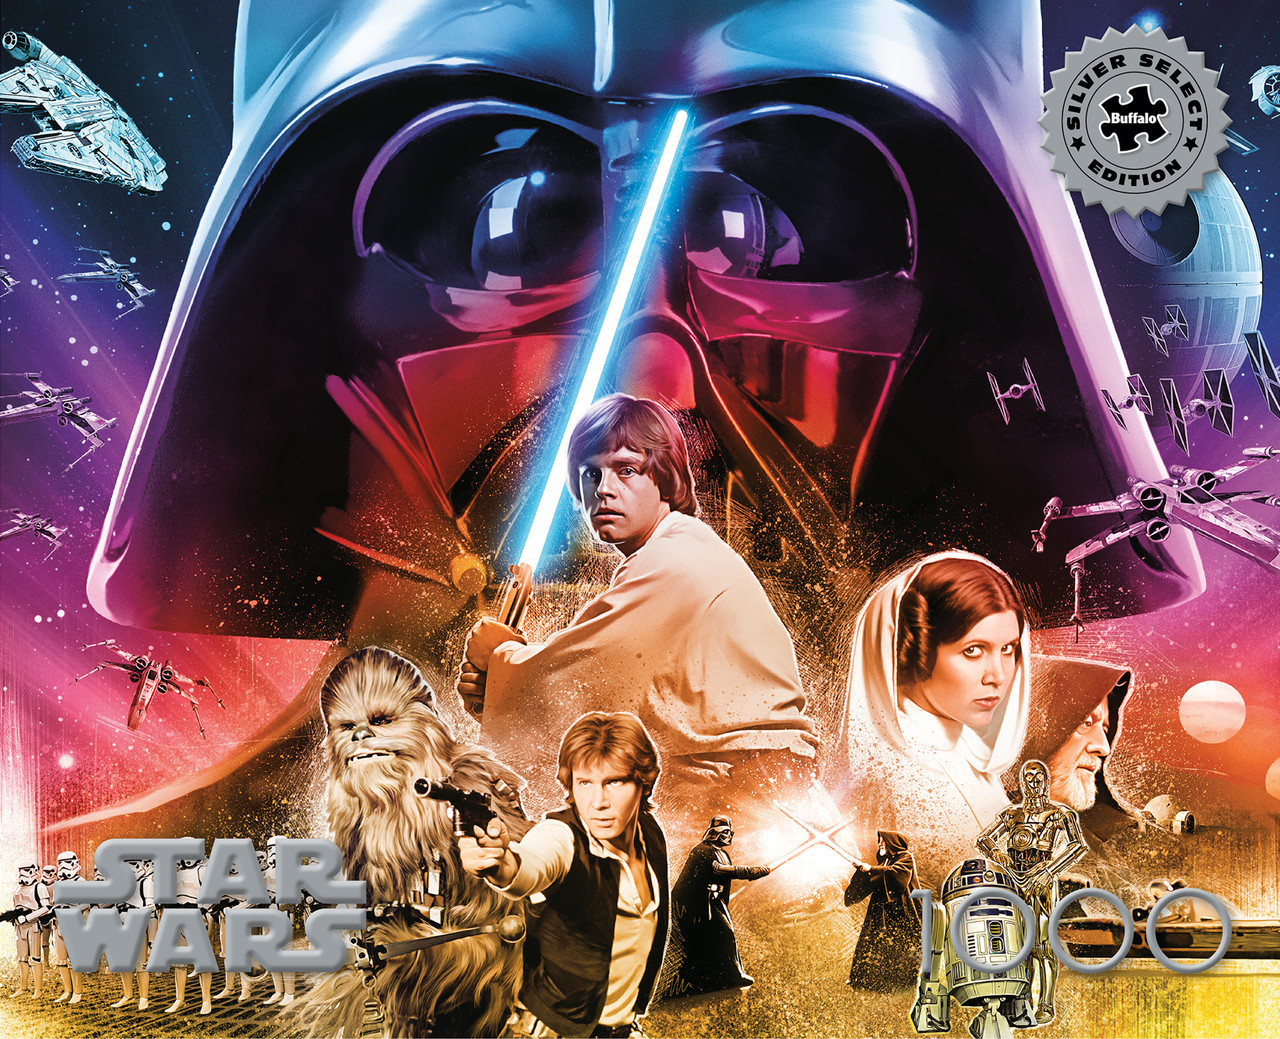 Star Wars Trilogy Movie Posters Collage Jigsaw Puzzle